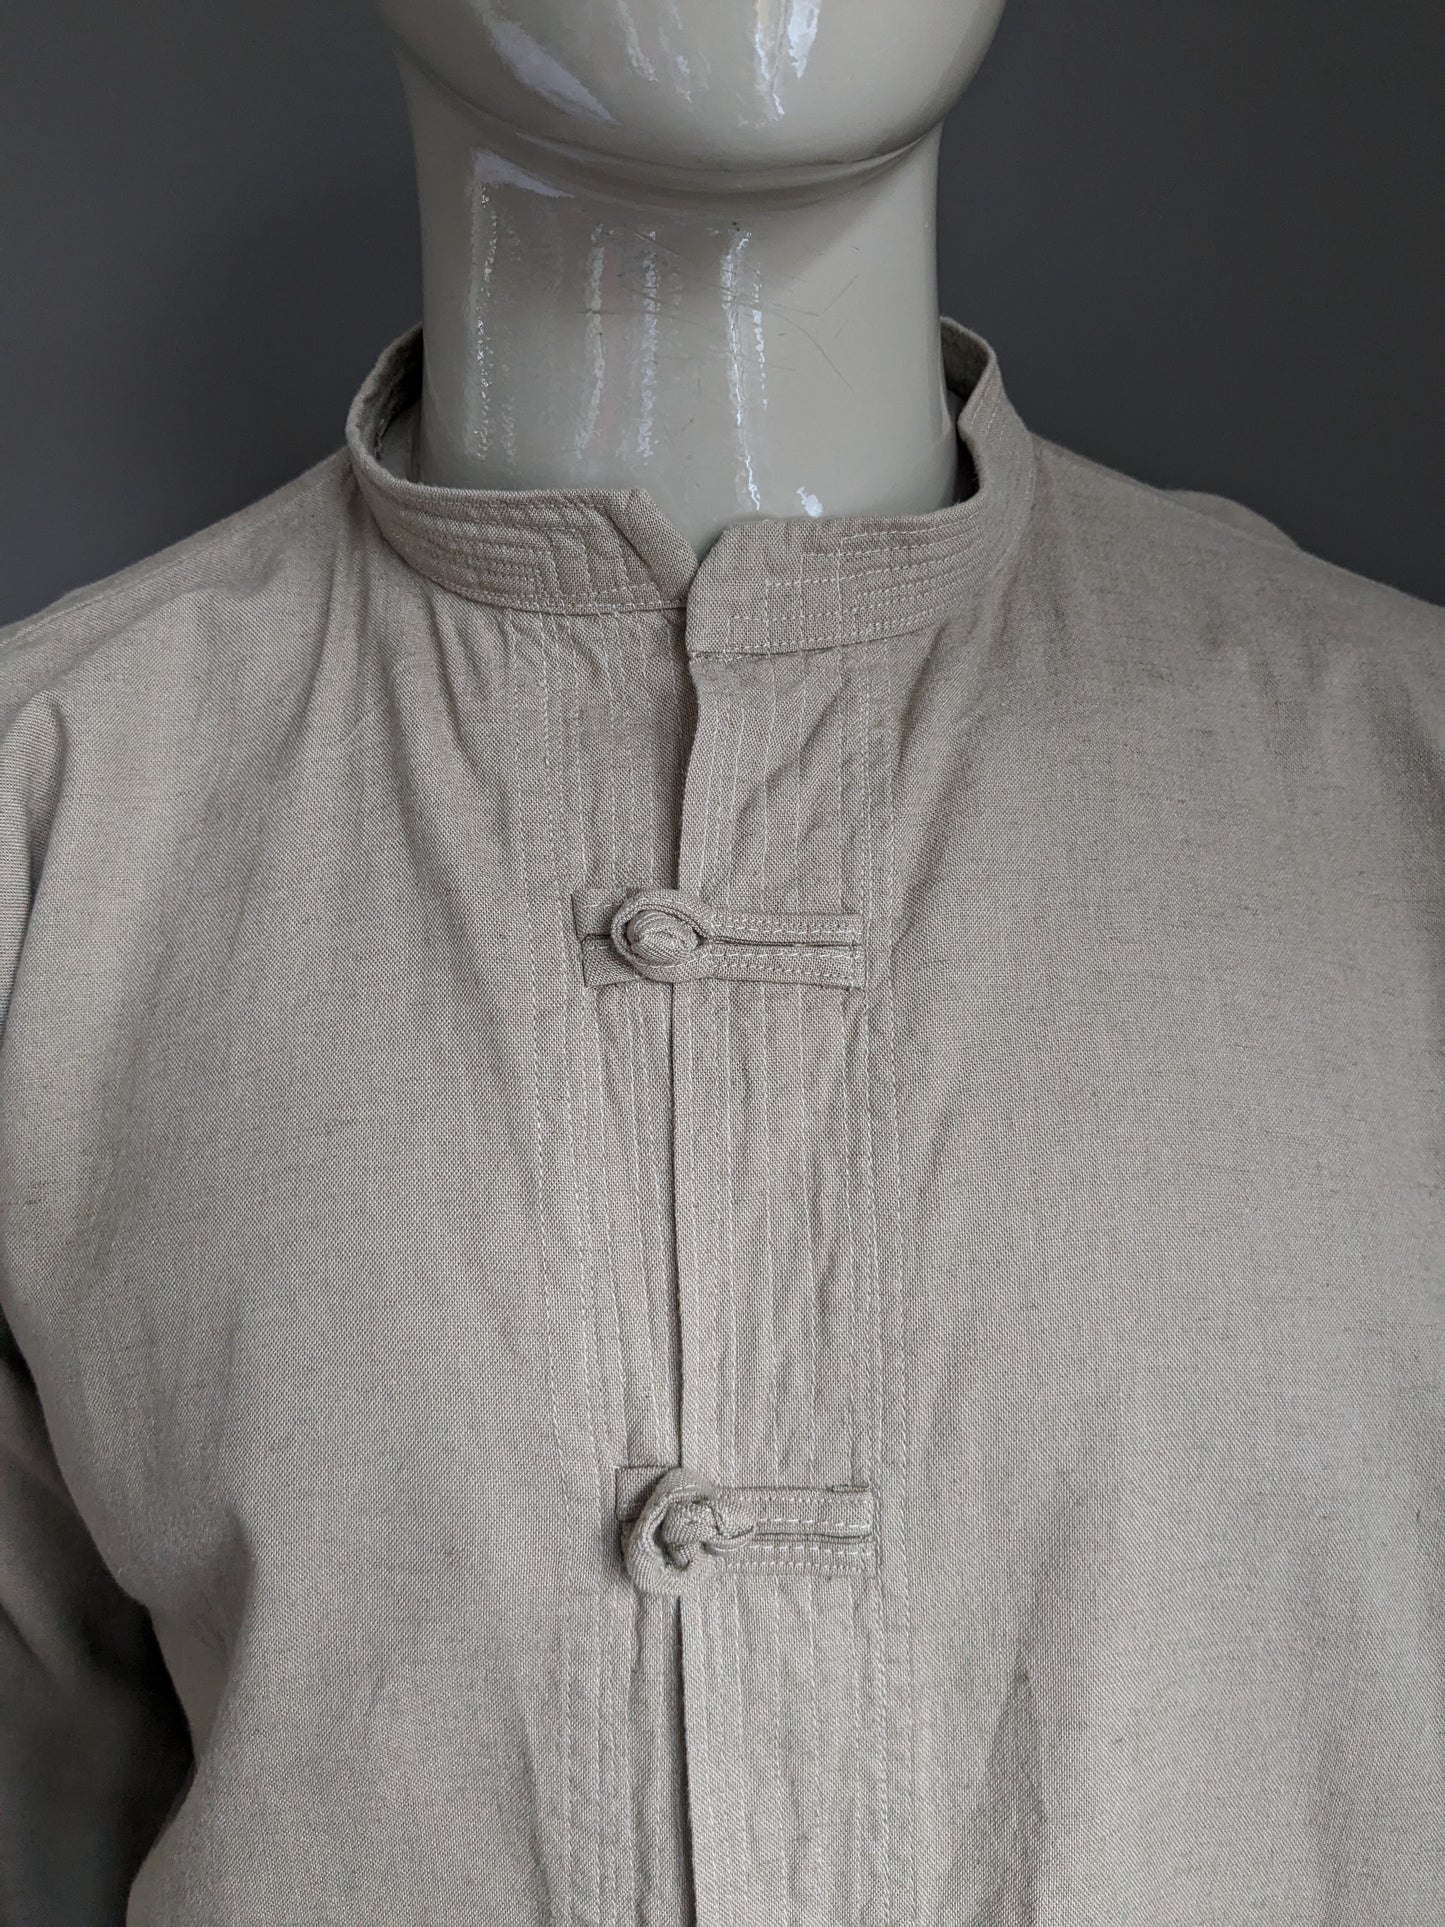 Vintage shirt with fabric buttons and mao / raised / farmer collar. Beige colored. Size 2XL / XXL.